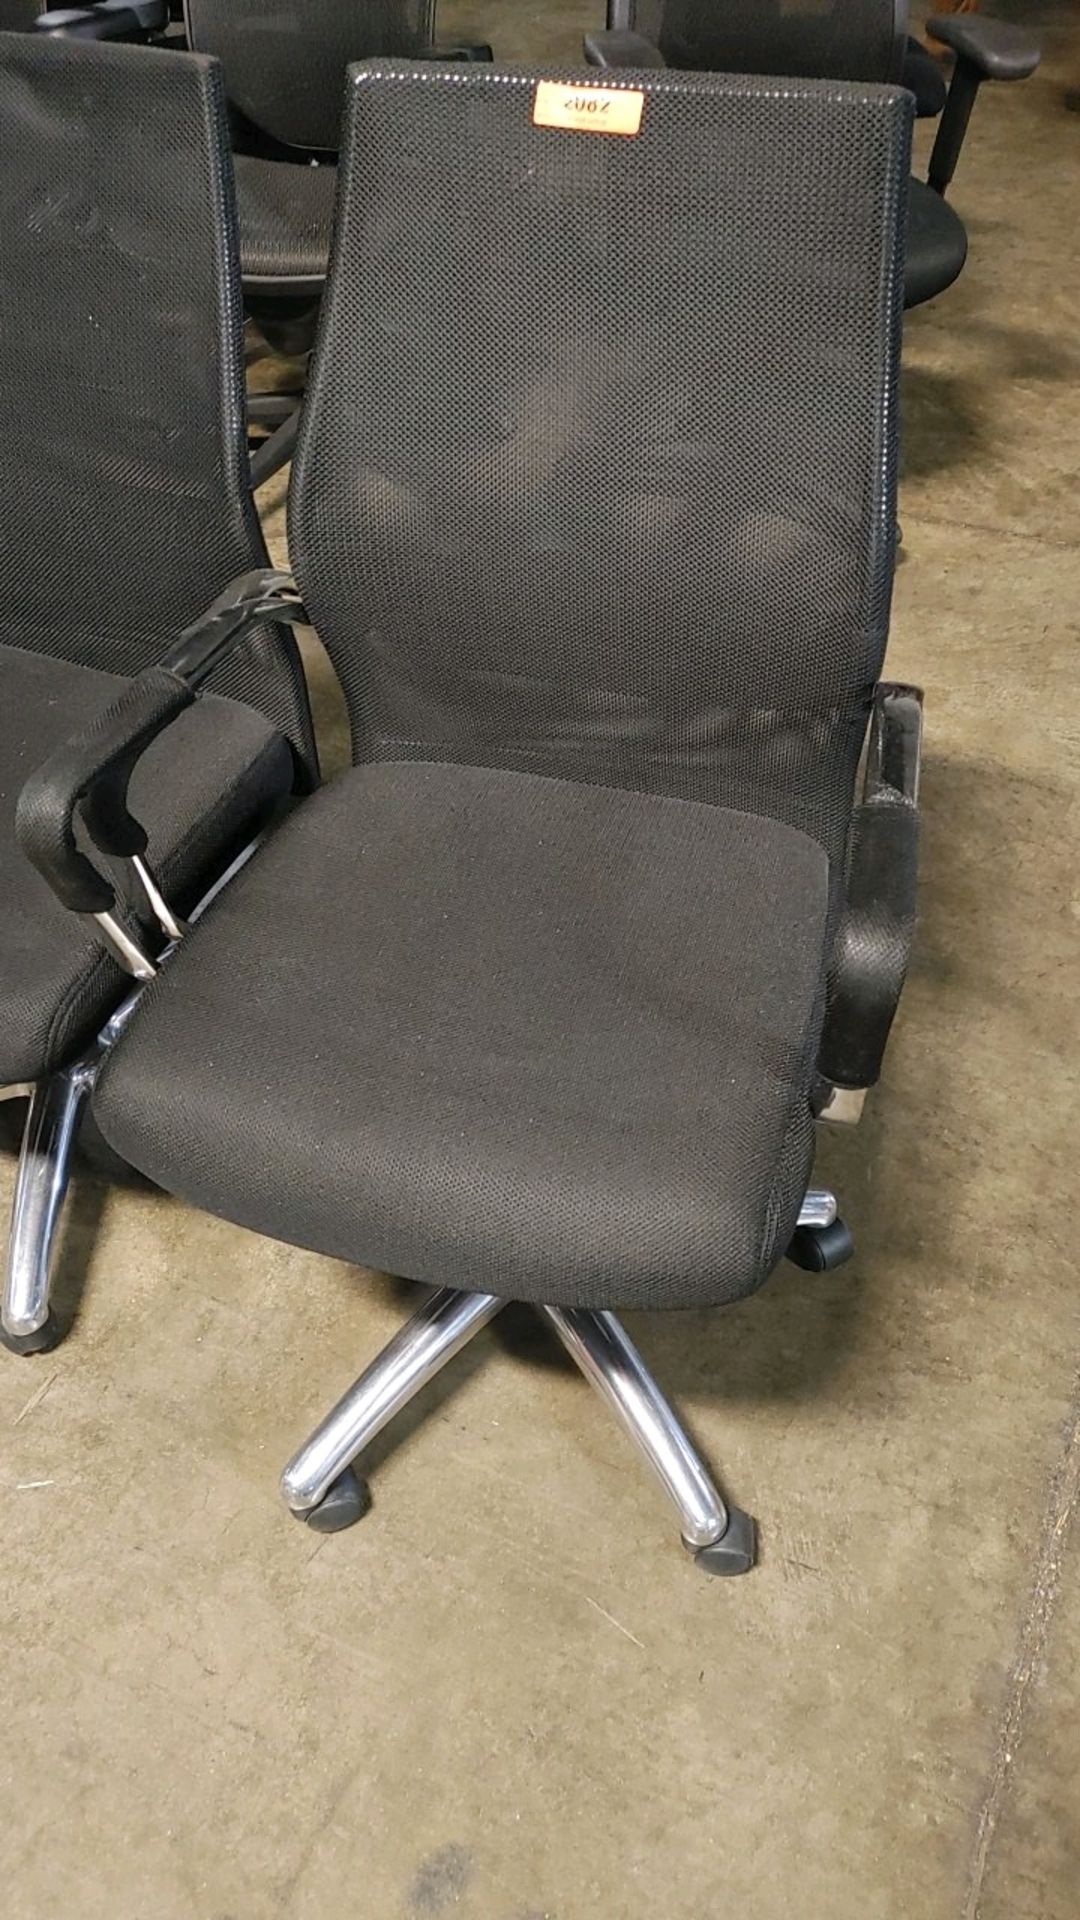 VARIOUS TASK OFFICE CHAIRS ON WHEELS QTY: 6, LOCATED: 3821 N. FRATNEY STREET MILWAUKEE, WI 53212